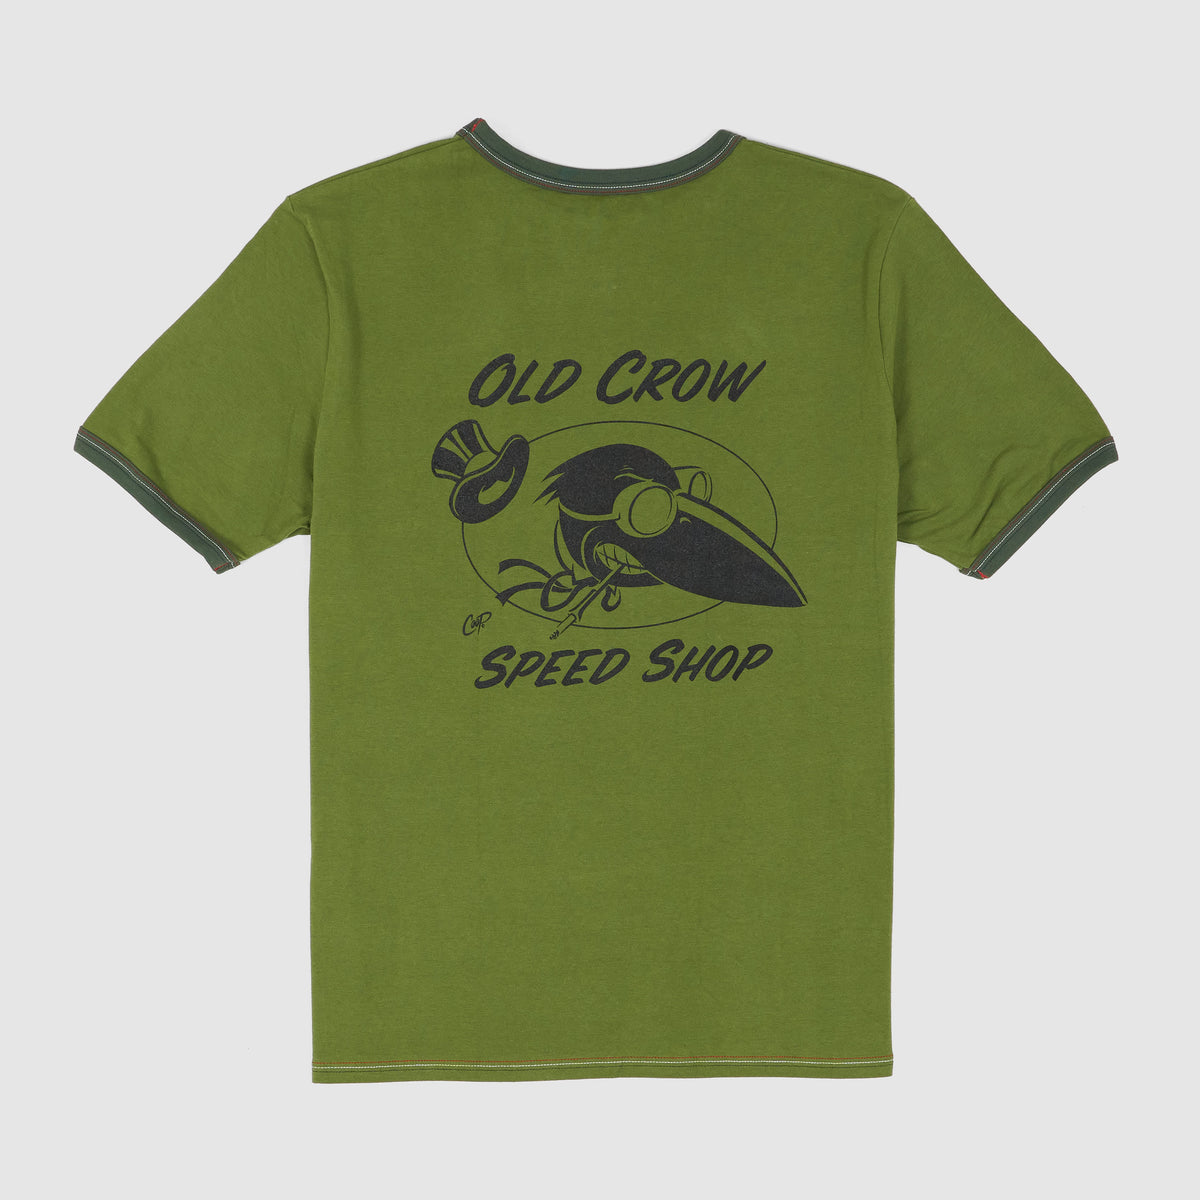 Old Crow Speed Shop Red Wite Blue  Crew Neck Printed T-Shirt